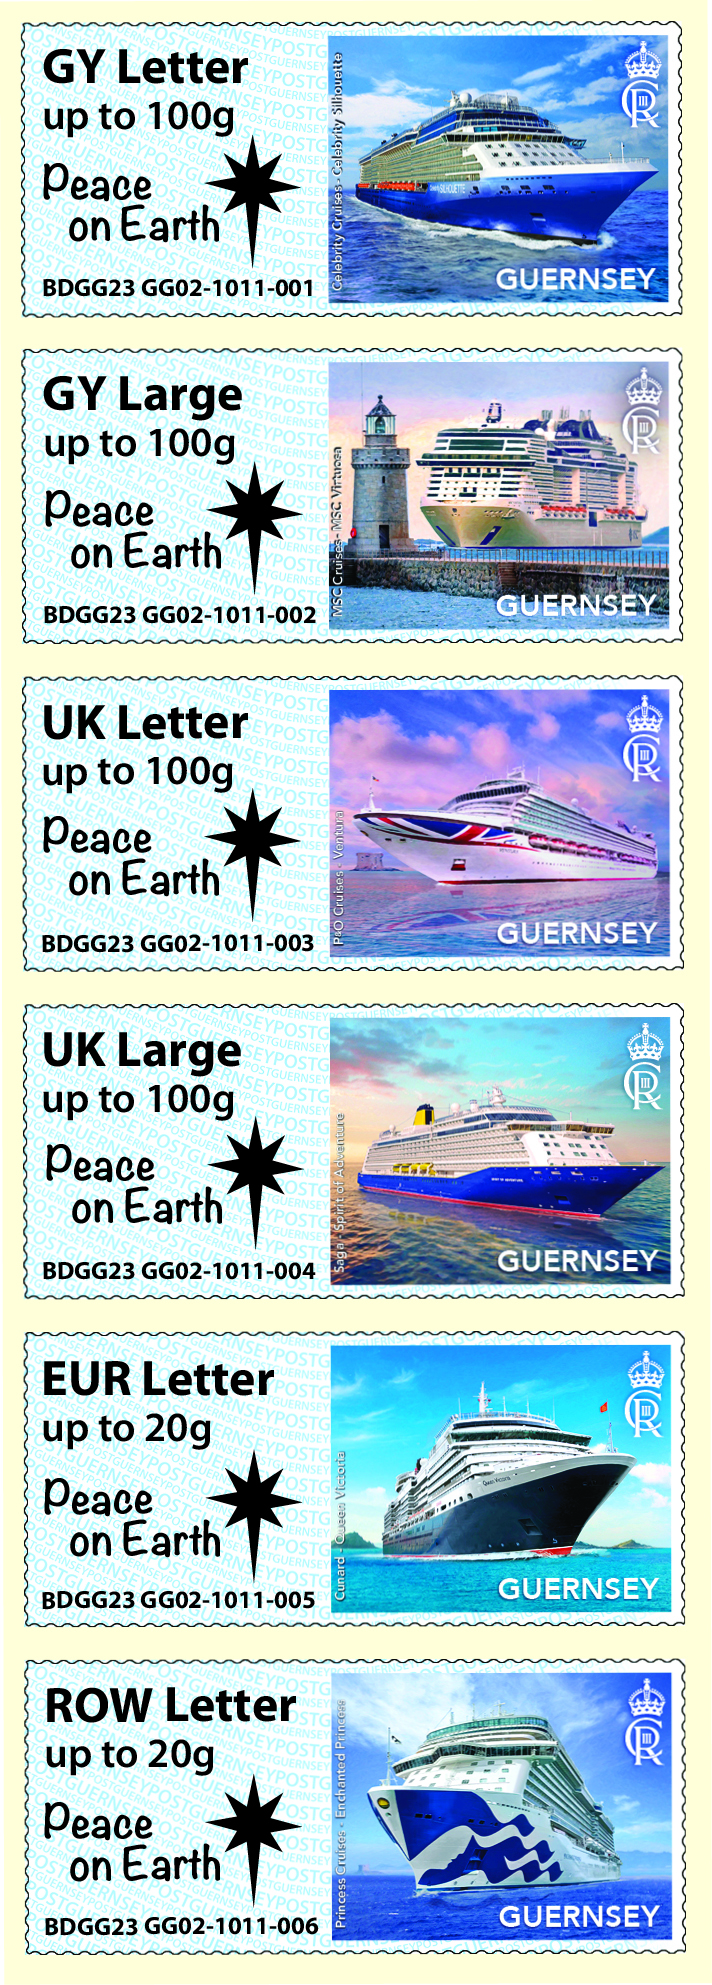 Guernsey's Post and Go stamps depict 2023 Seasonal message